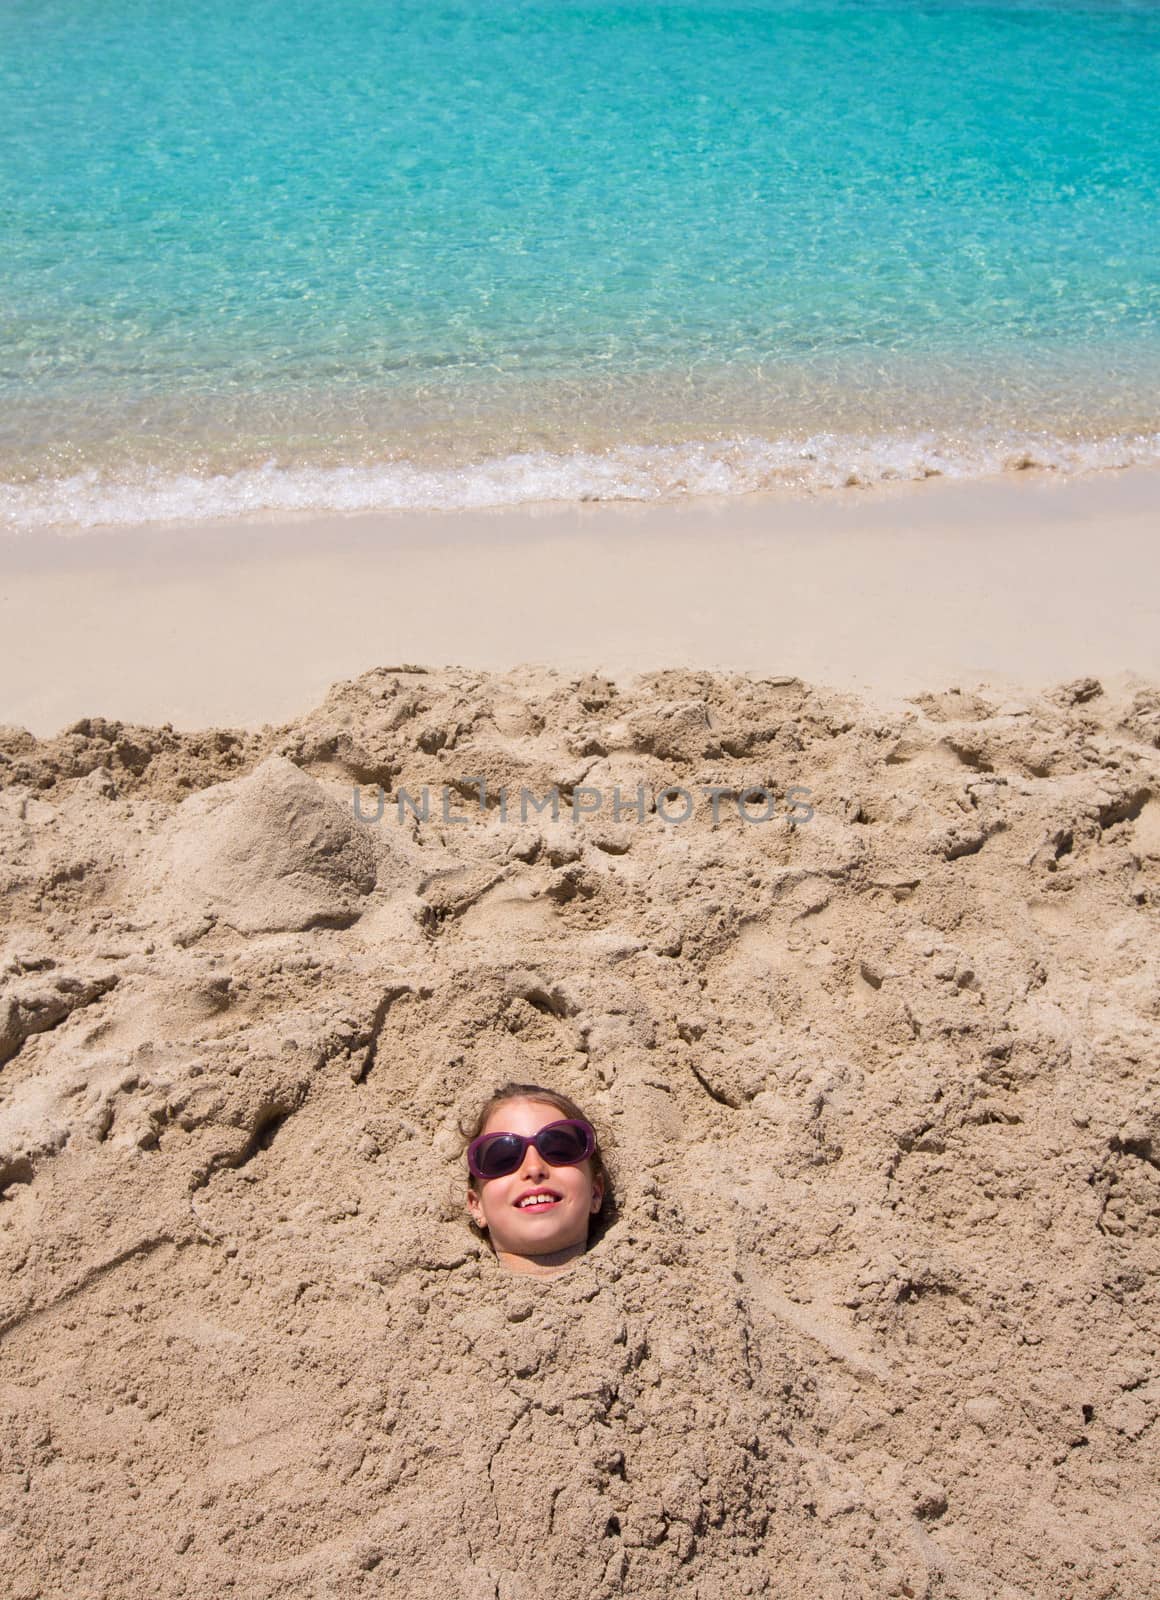 Funny girl playing buried in beach sand smiling sunglasses by lunamarina